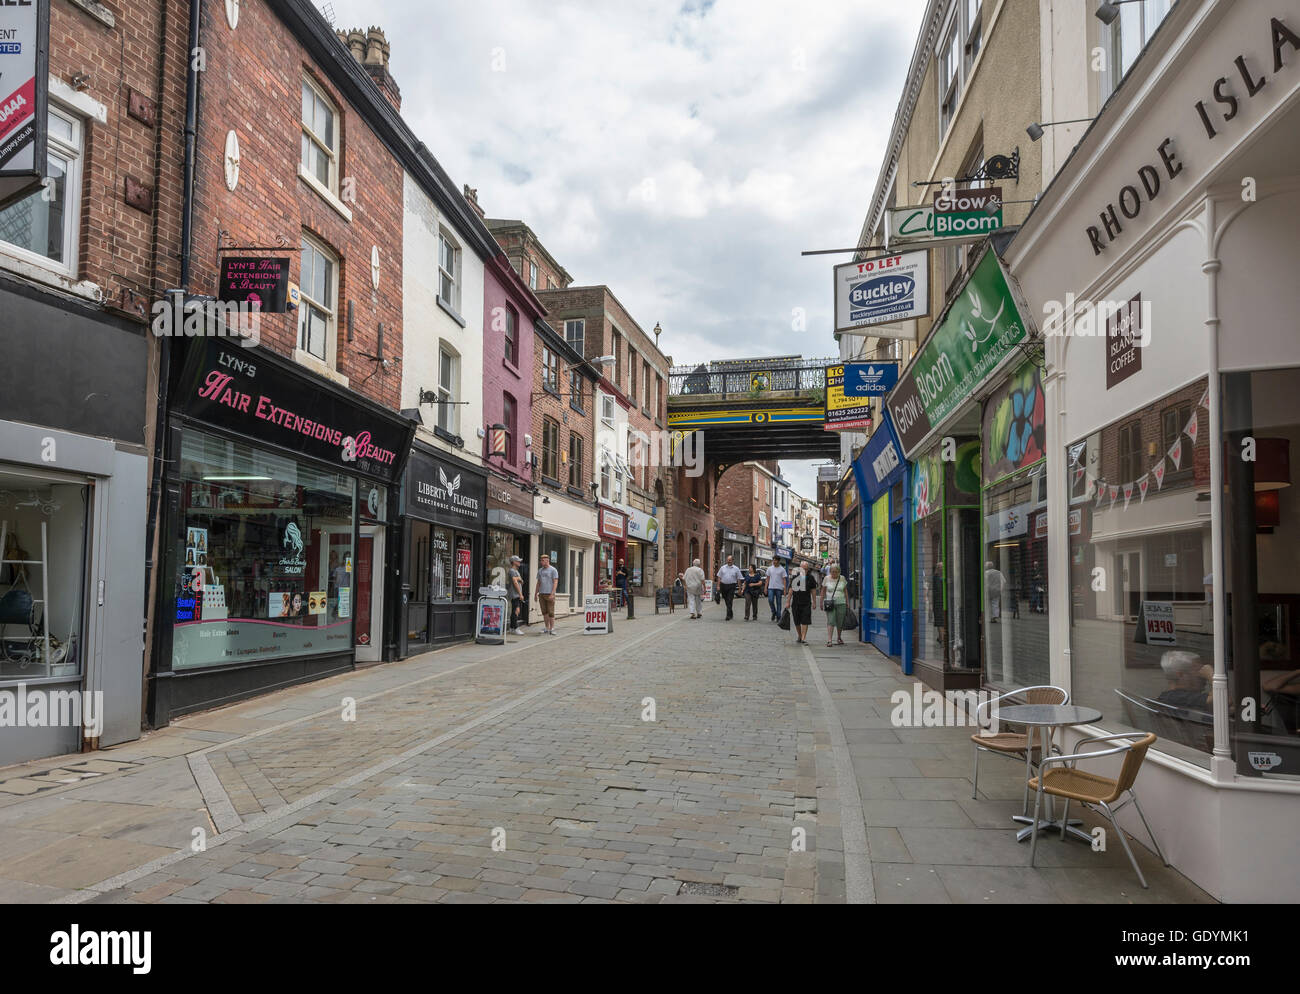 Underbank, a shopping street in the town of Stockport, Greater Manchester, England. Stock Photo